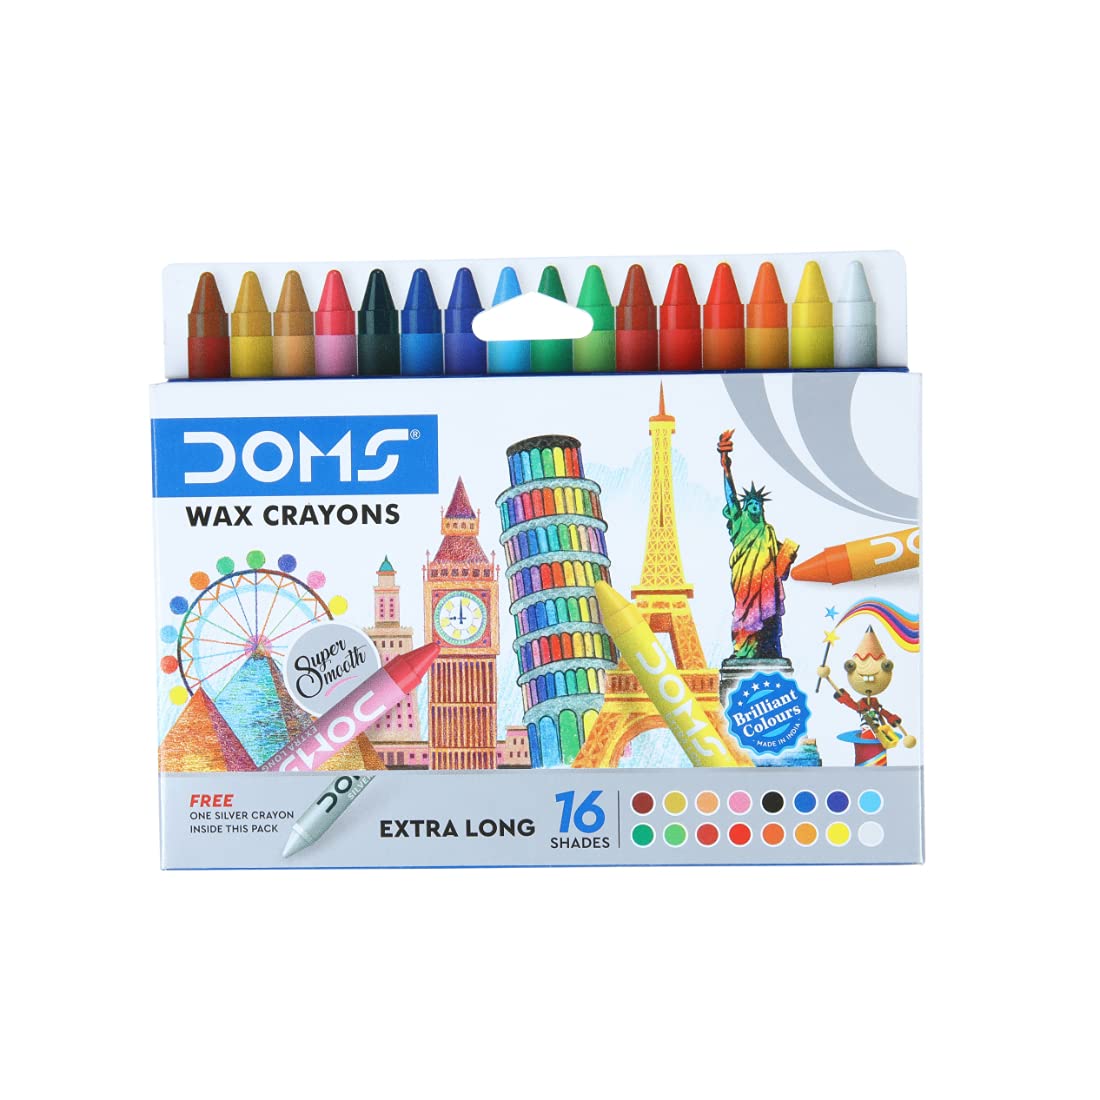 Doms Non-Toxic Extra Long Wax Crayon Set In Cardboard Box - 16 Assorted Shades